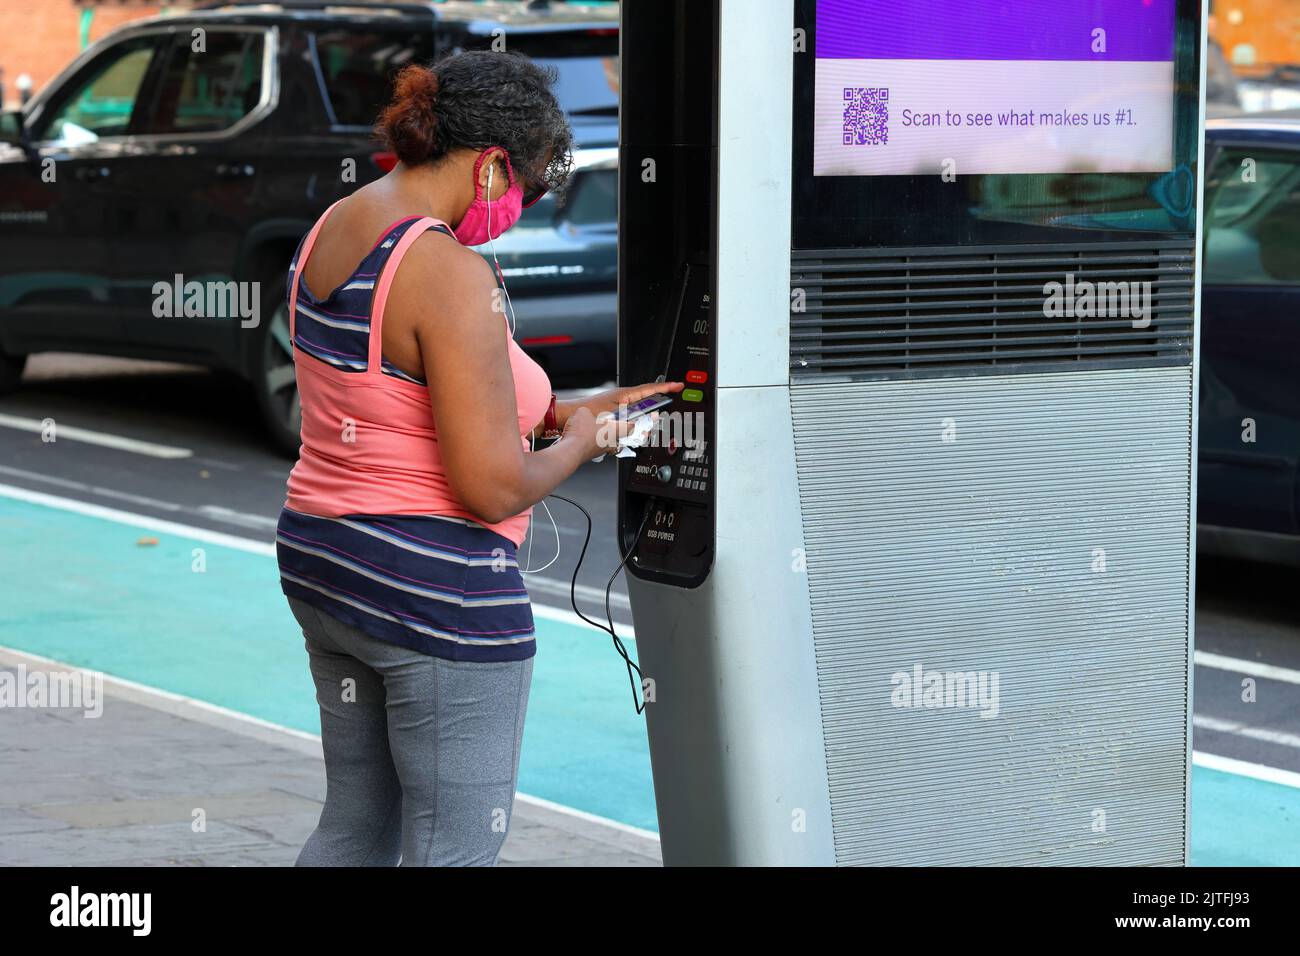 A person recharging their smartphone and using the free wifi at a LinkNYC Wi-Fi kiosk in New York City. Stock Photo